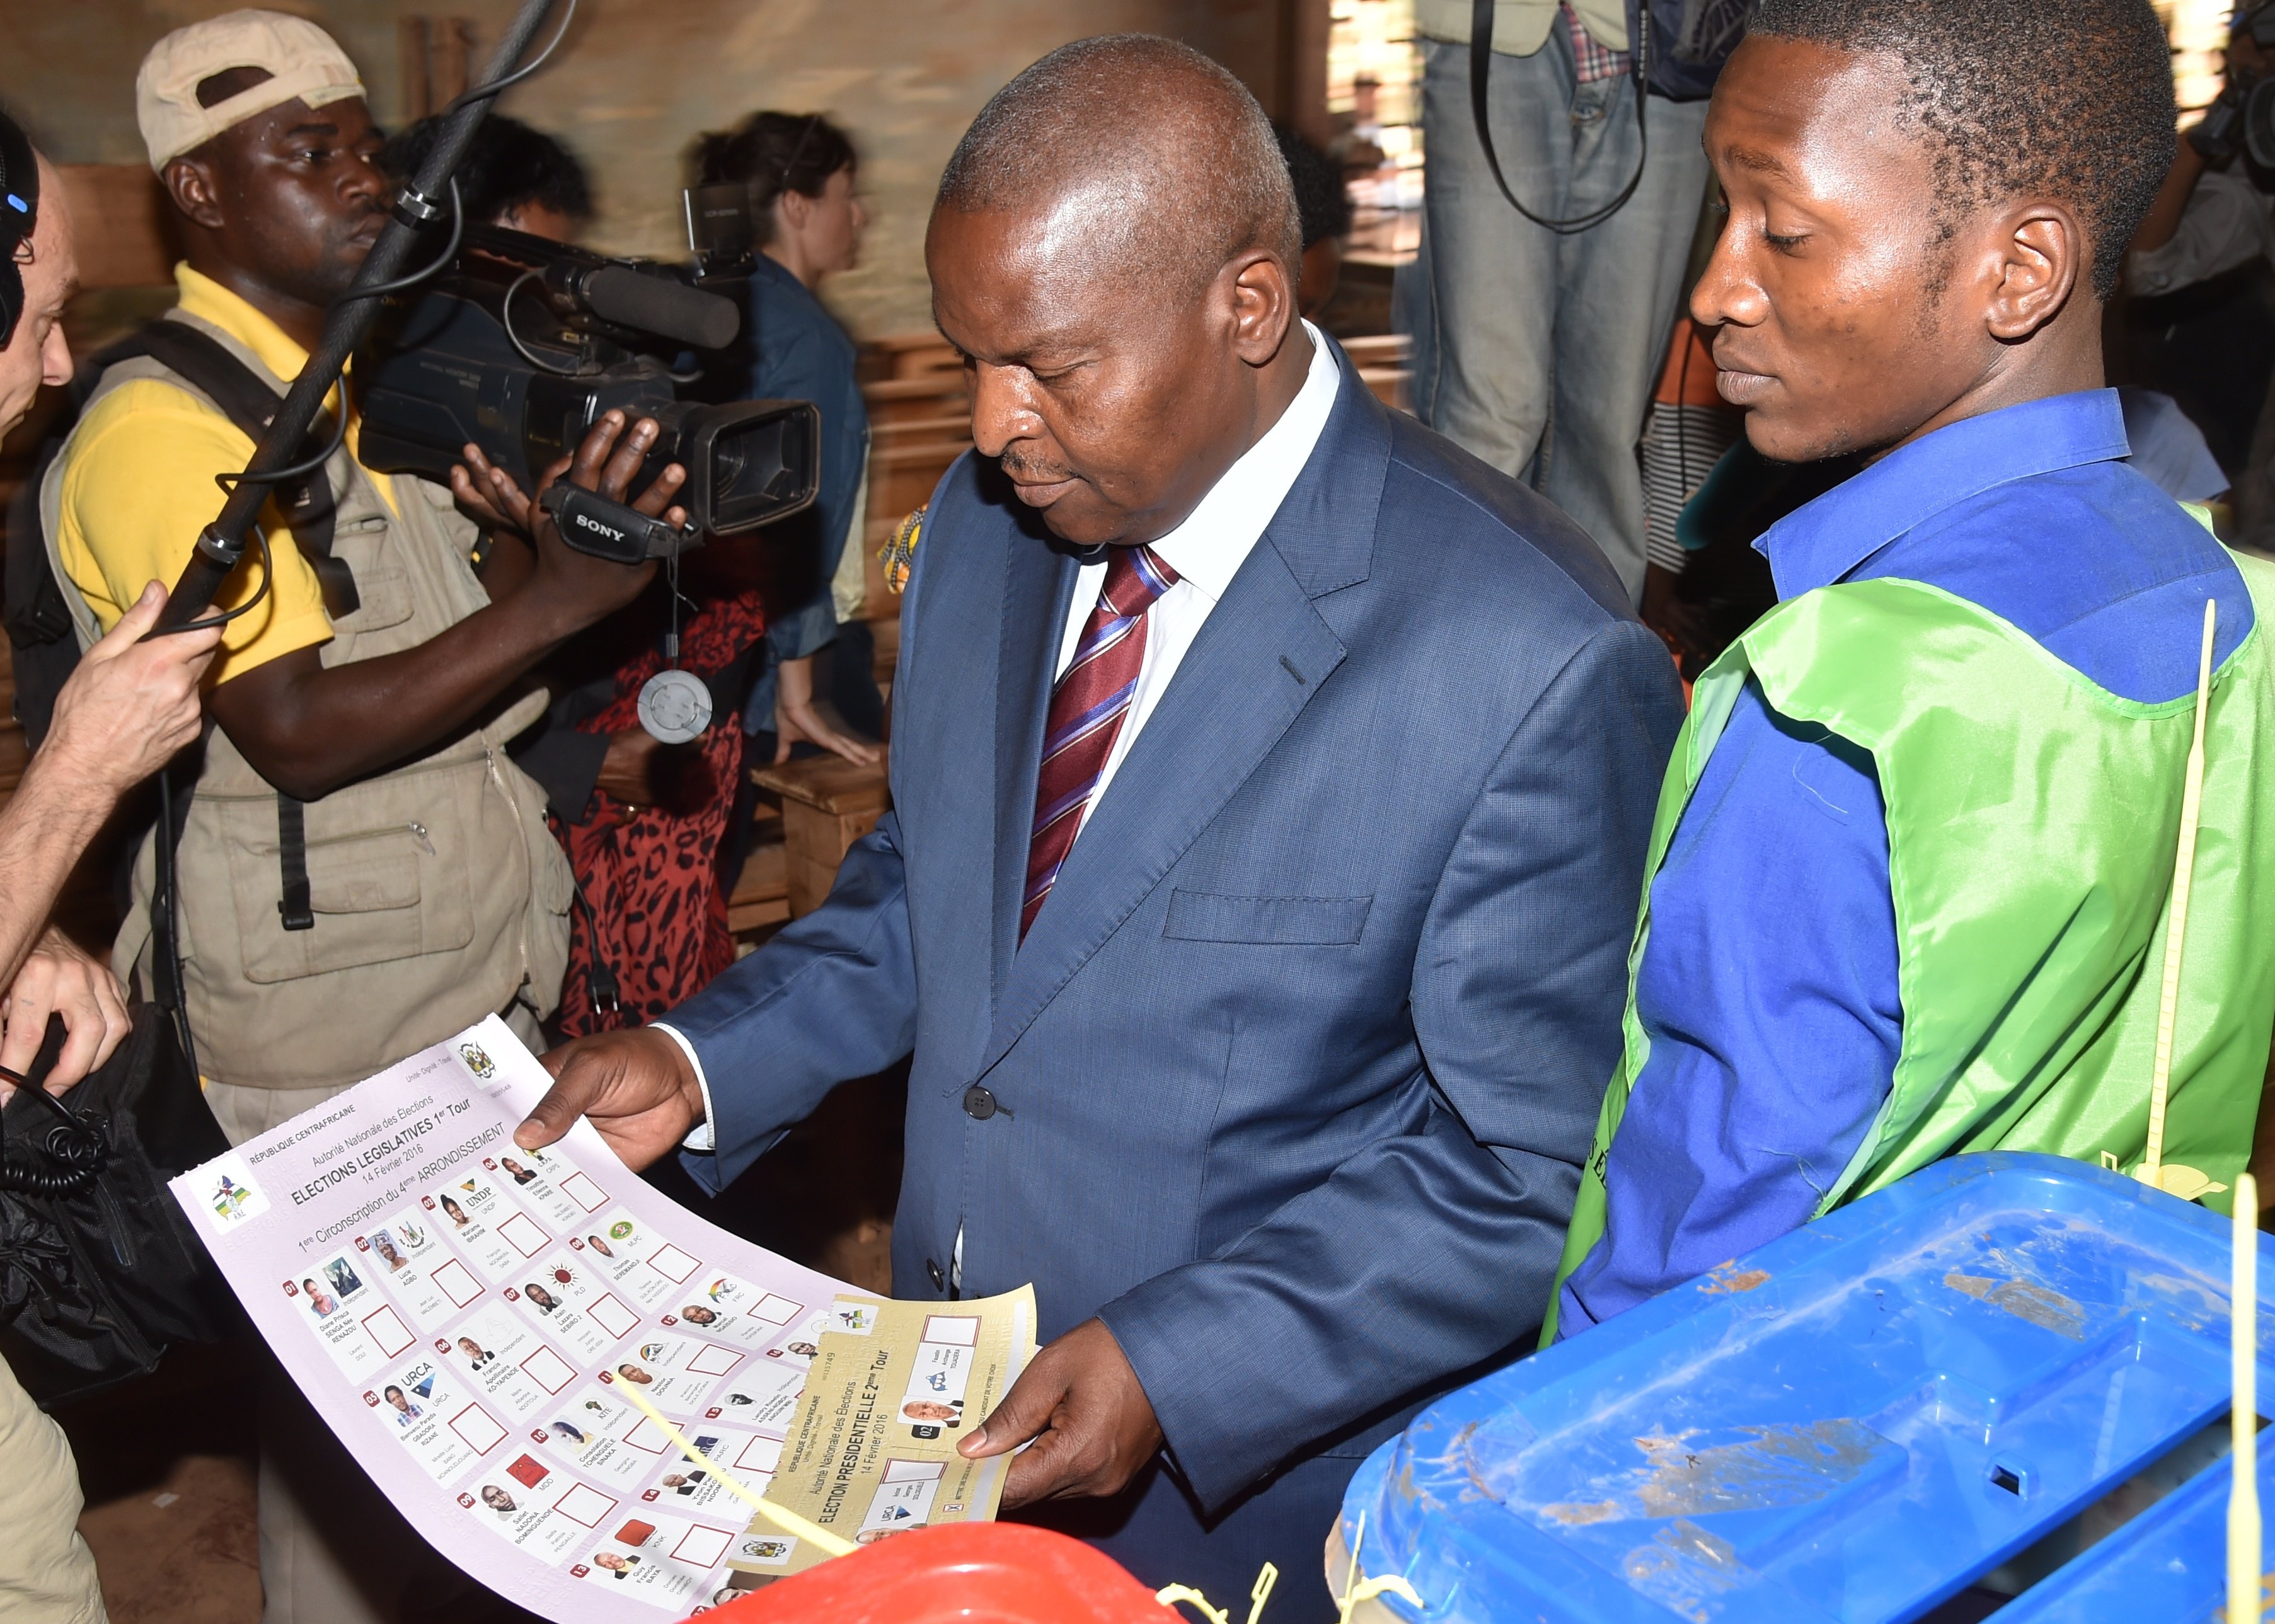 Central African Republic second round presidential candidate Faustin Archange Touadera (C) looks at a ballot before voting for delayed legislative elections and a presidential run-off, at a polling station in Bangui, on Feb. 14, 2016. (Issouf Sanogo—AFP/Getty Images)